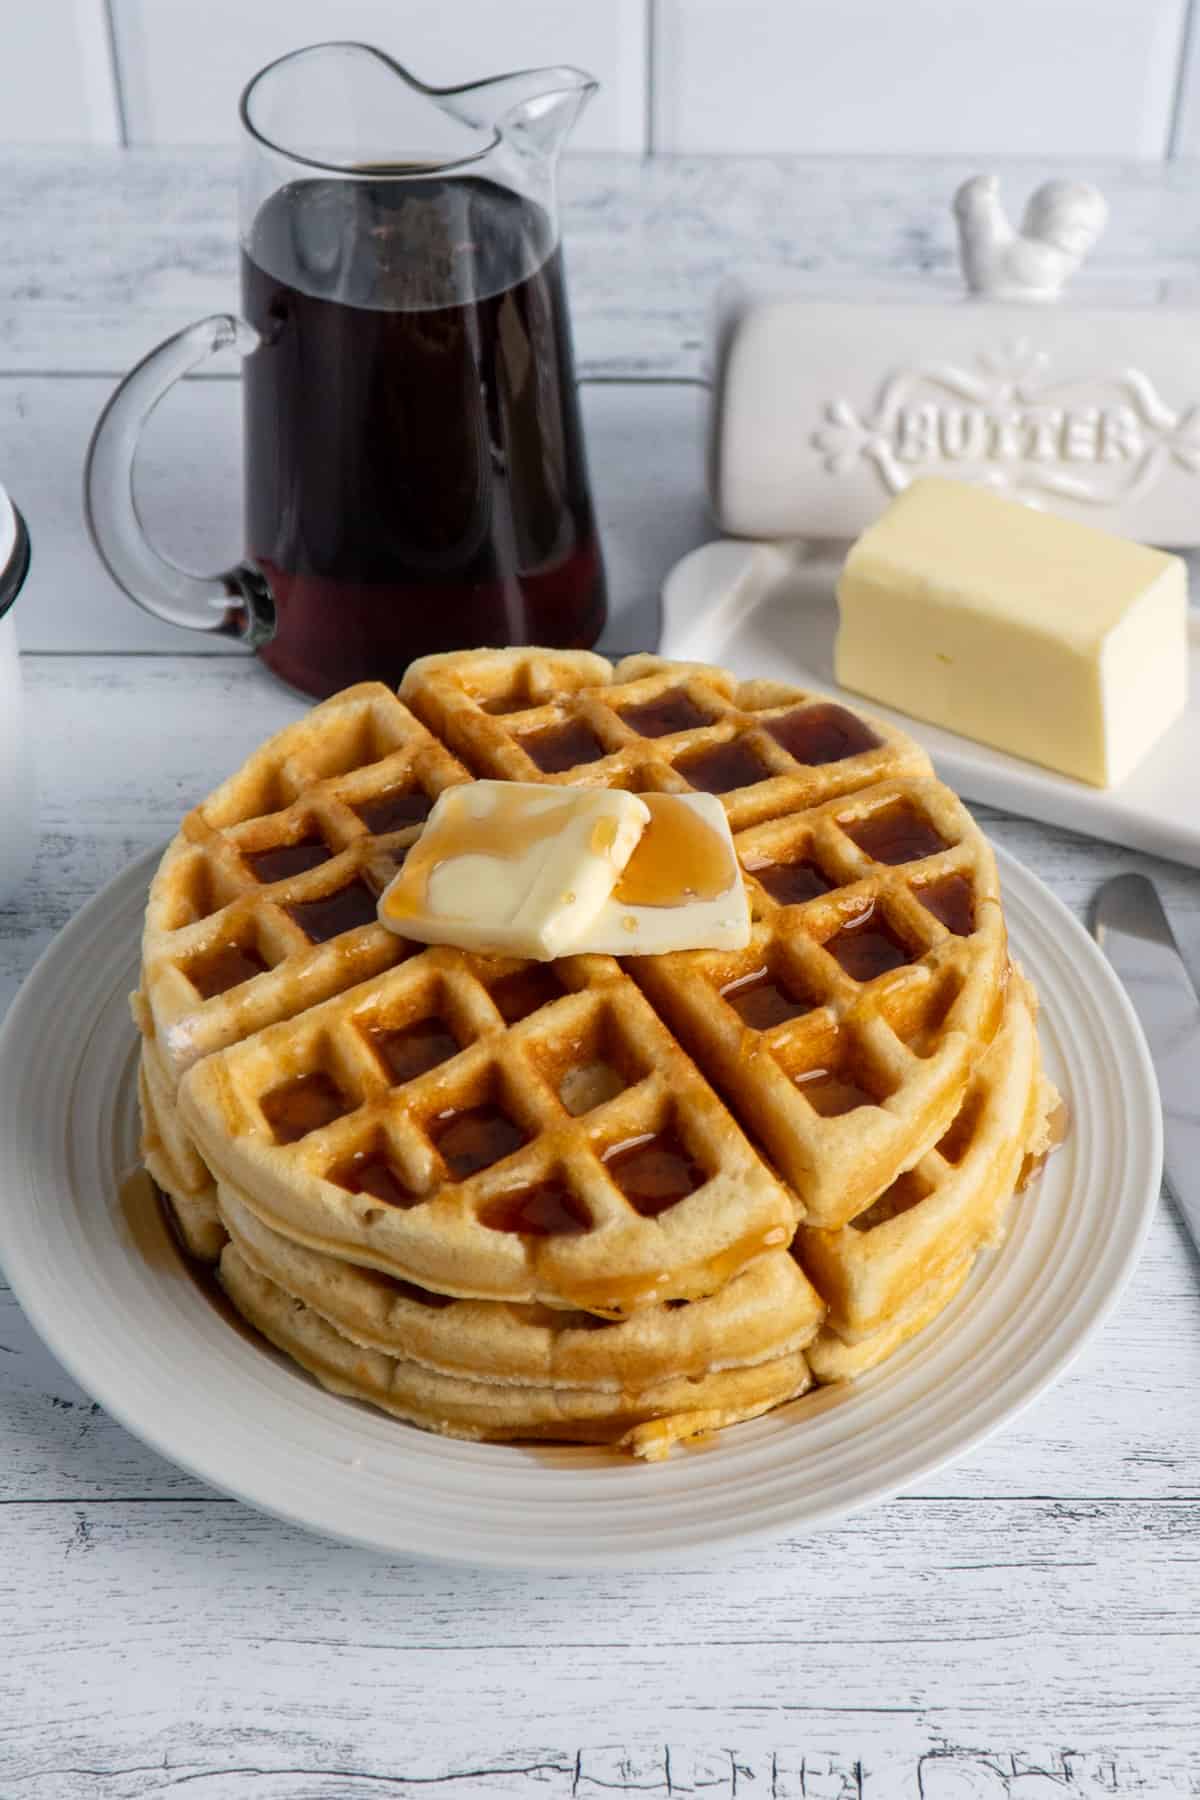 Homemade waffles stacked on top of each other with syrup and butter.